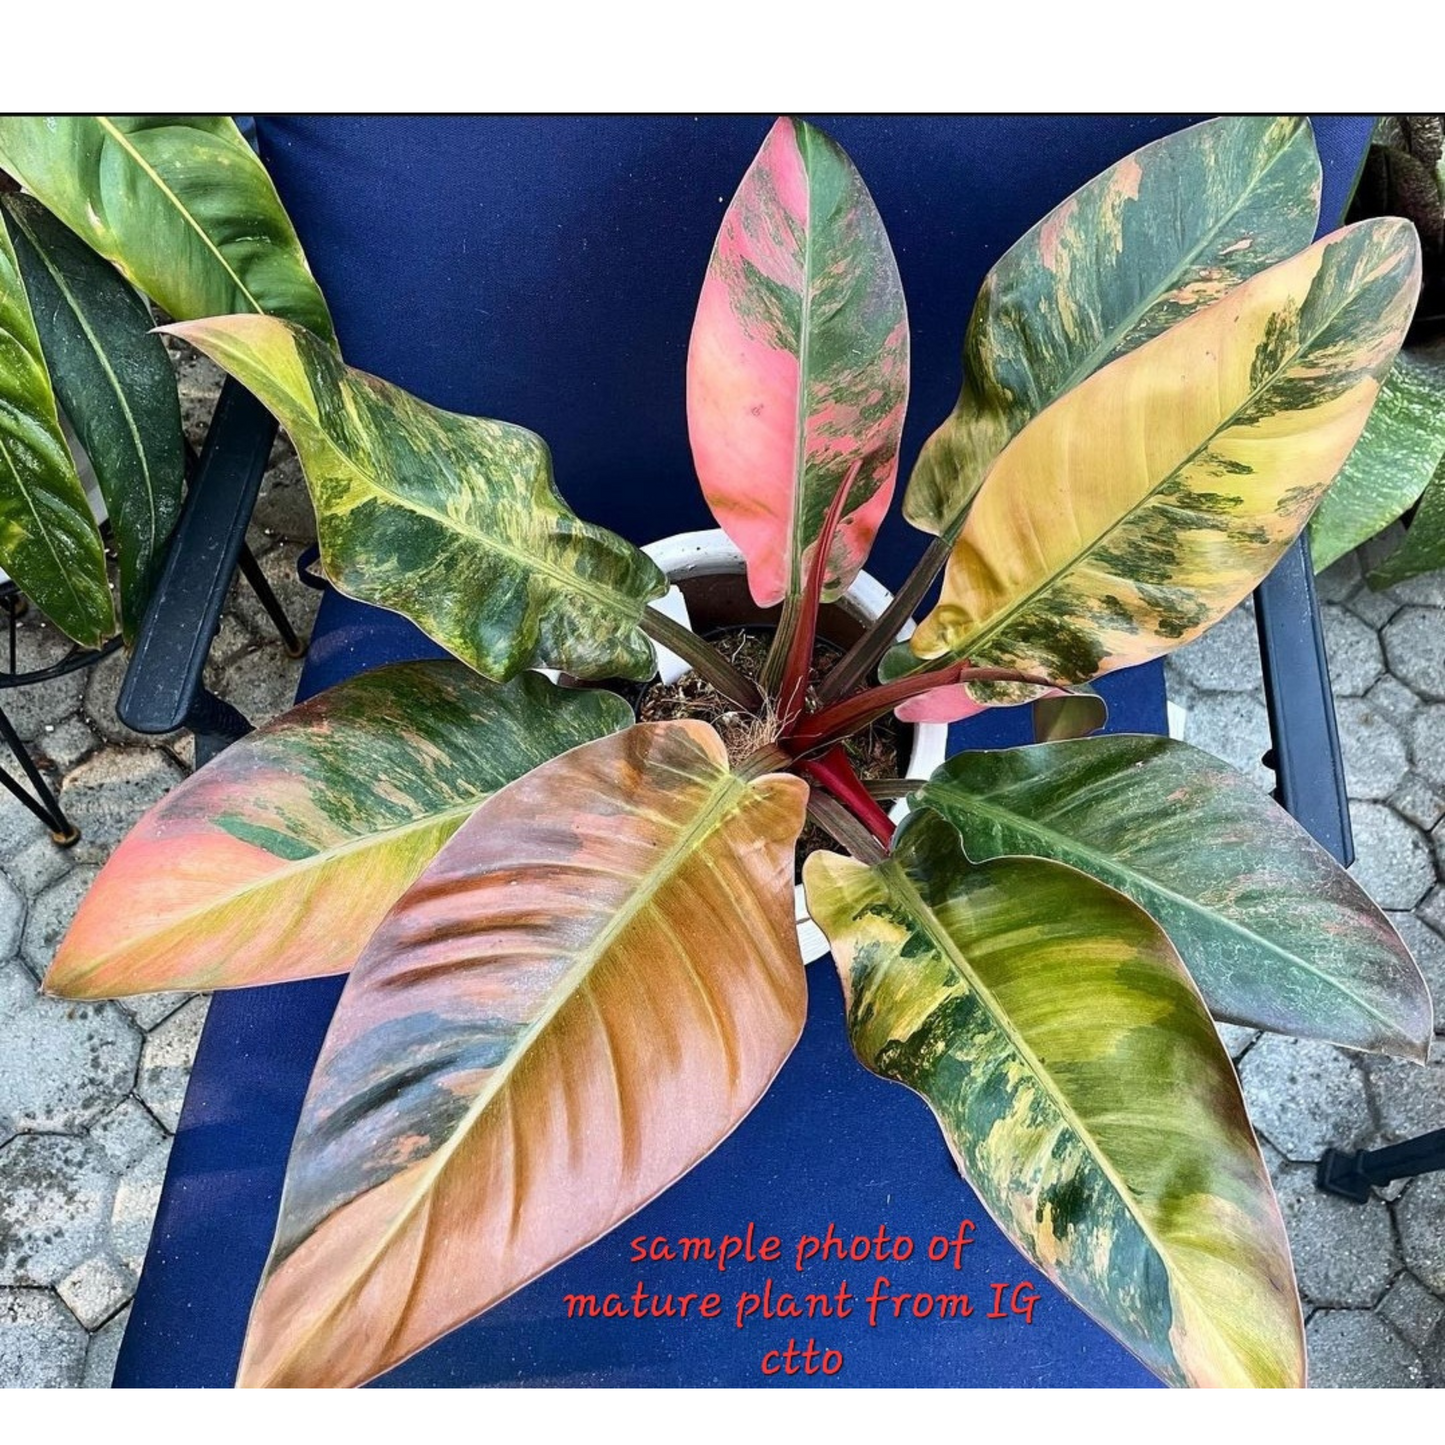 rare Variegated Philodendron Imperial Red for sale in Perth Australia